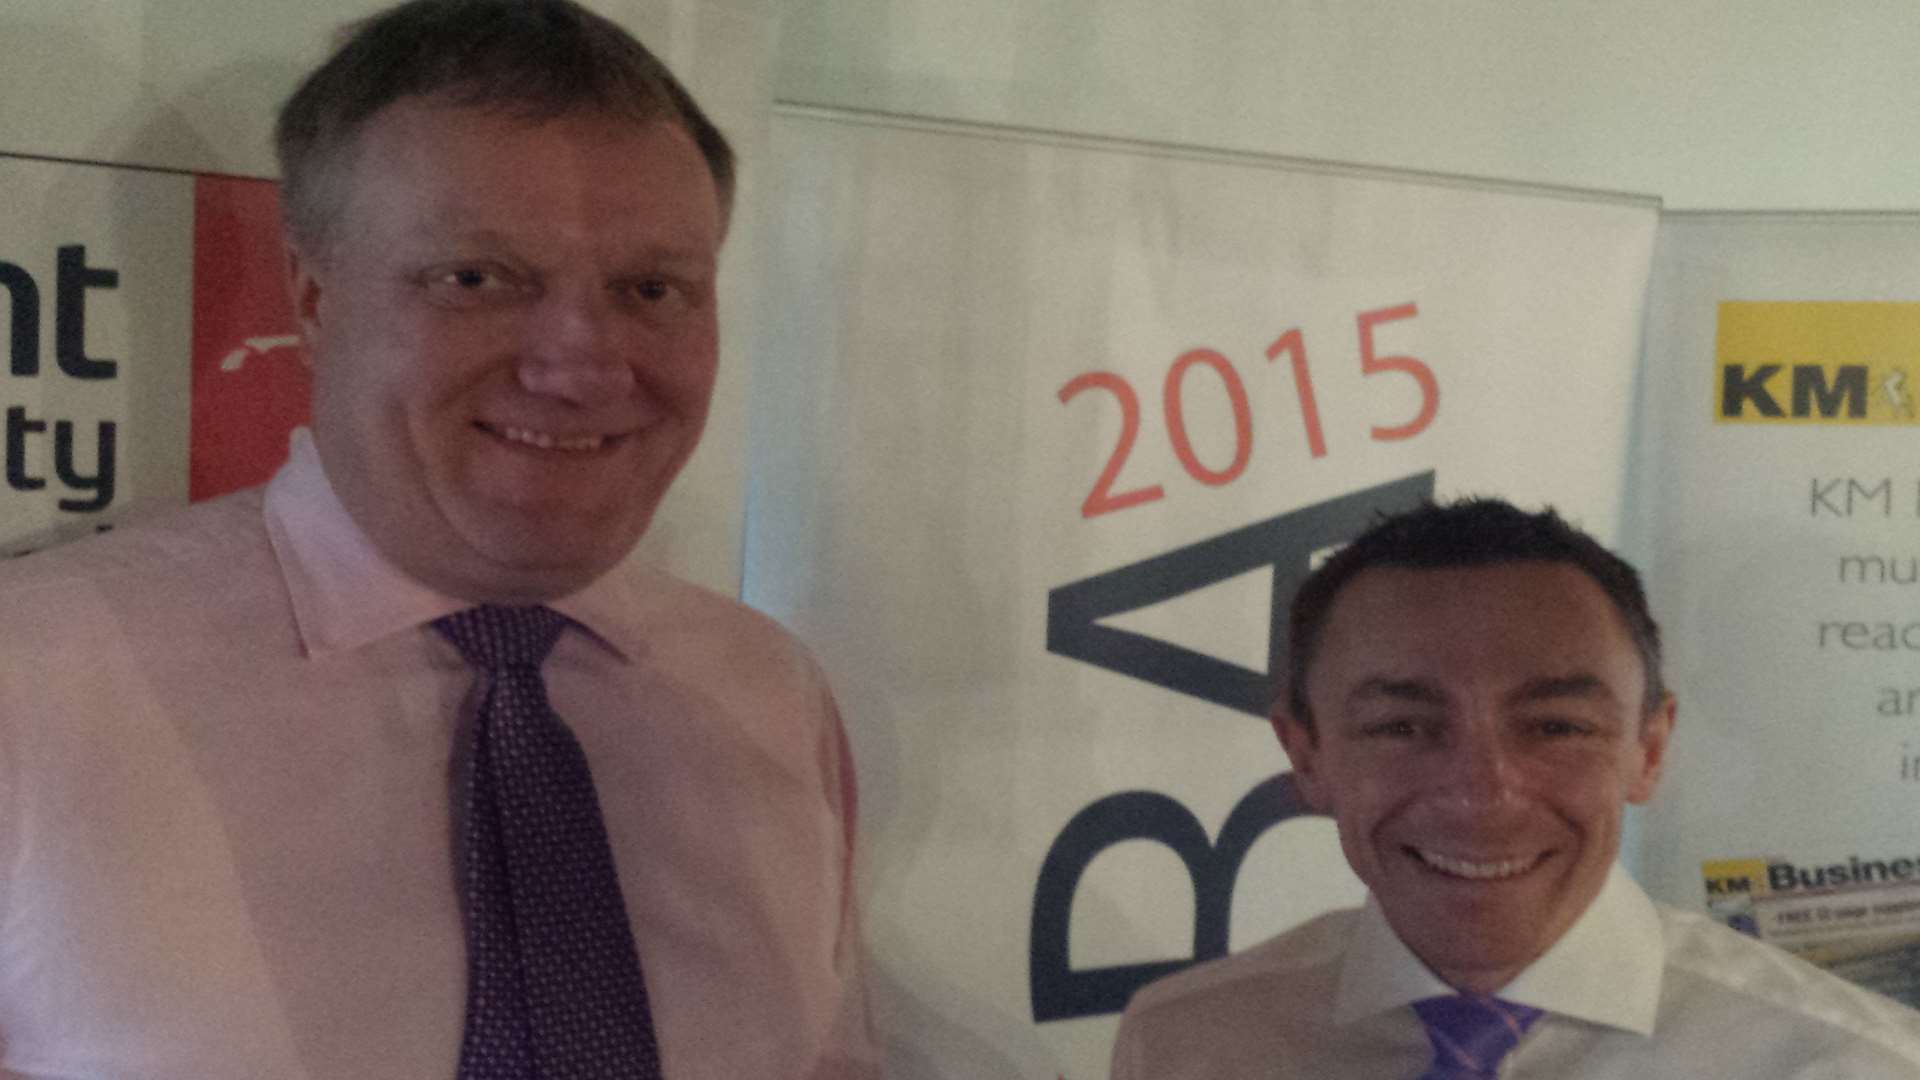 Aon directors Nick Rolfe, left, and Chris Naylor at the IOD KEiBA breakfast at Aylesford Priory